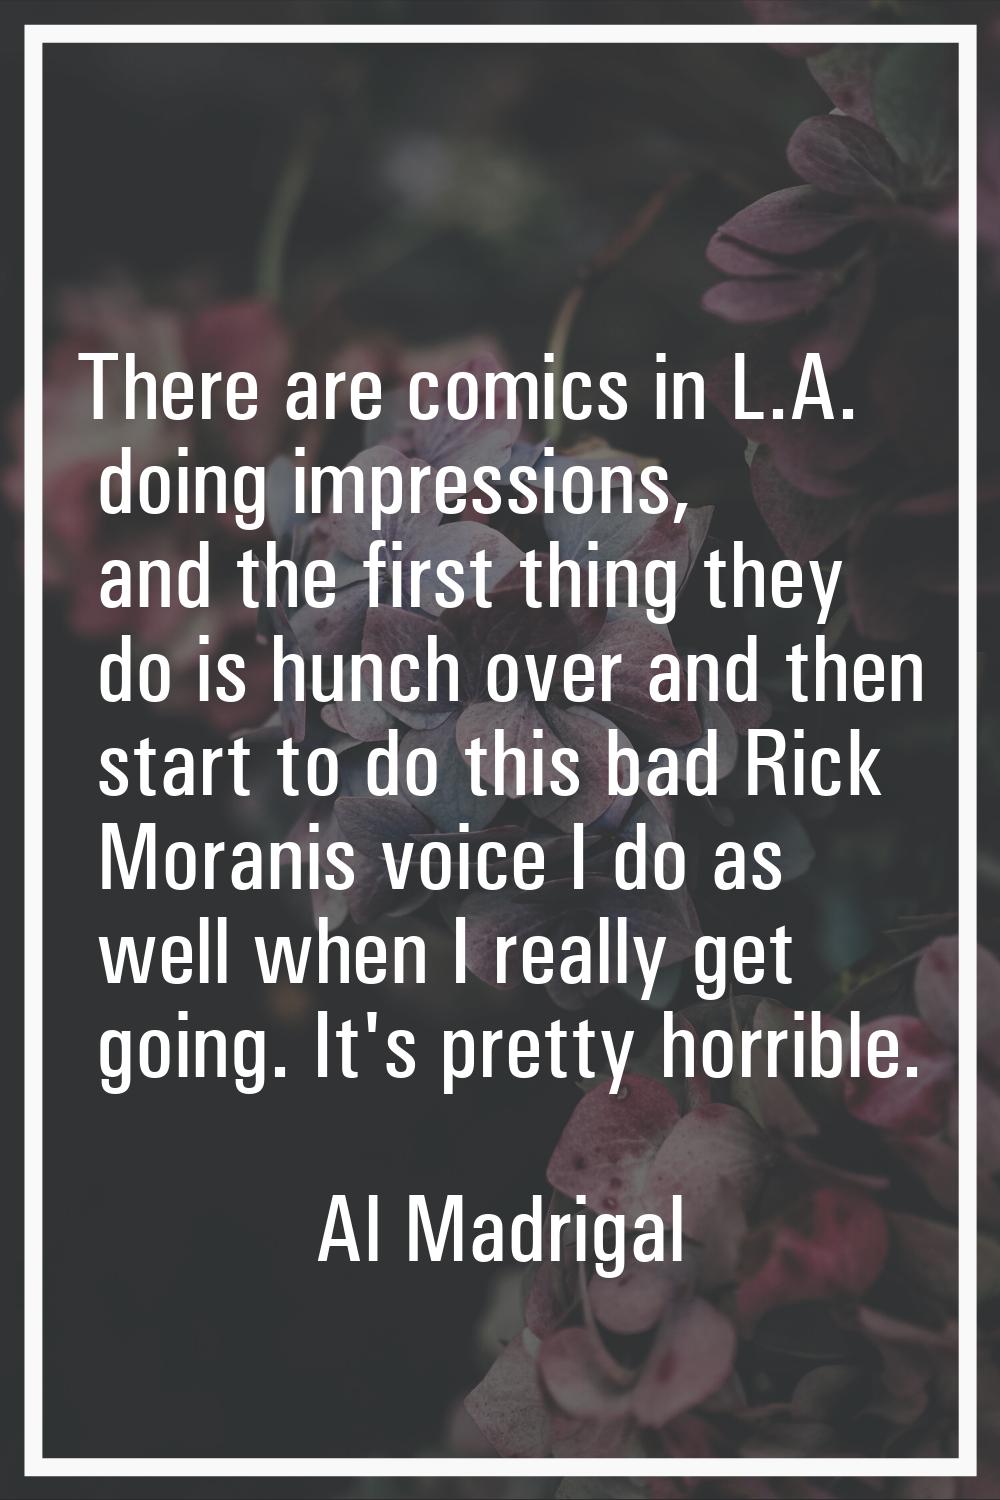 There are comics in L.A. doing impressions, and the first thing they do is hunch over and then star